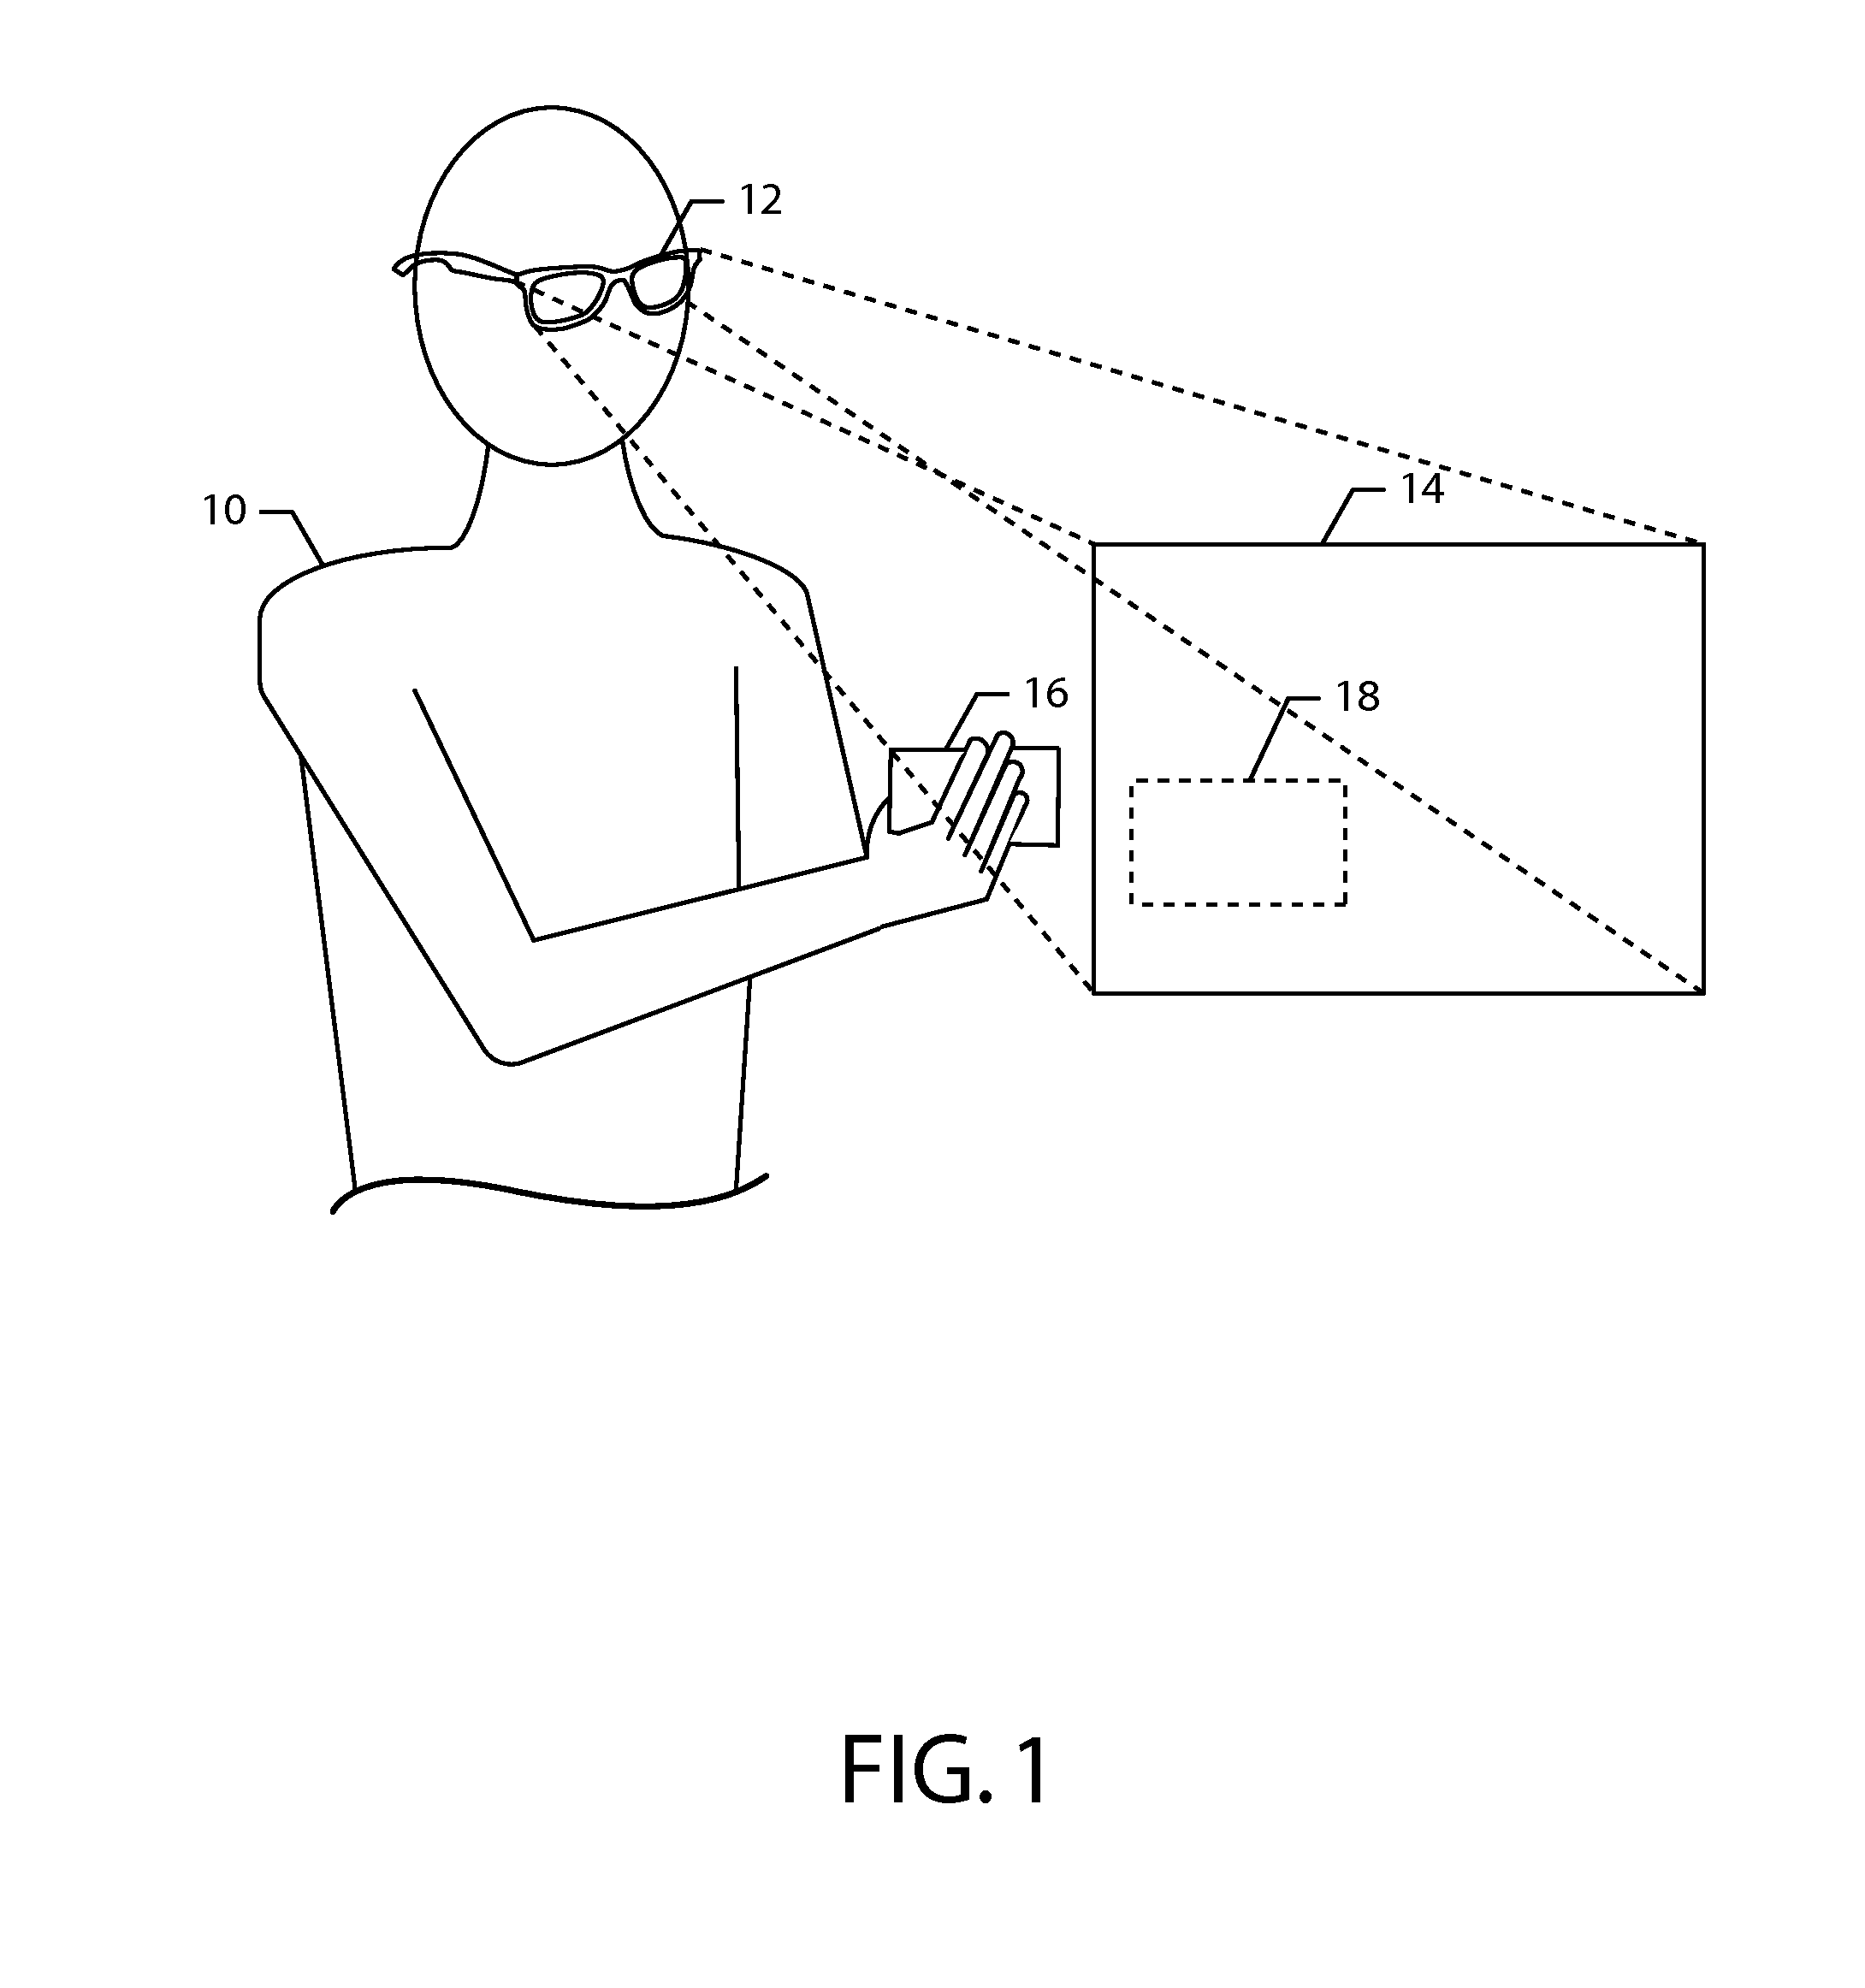 Method and apparatus for augmenting an index generated by a near eye display